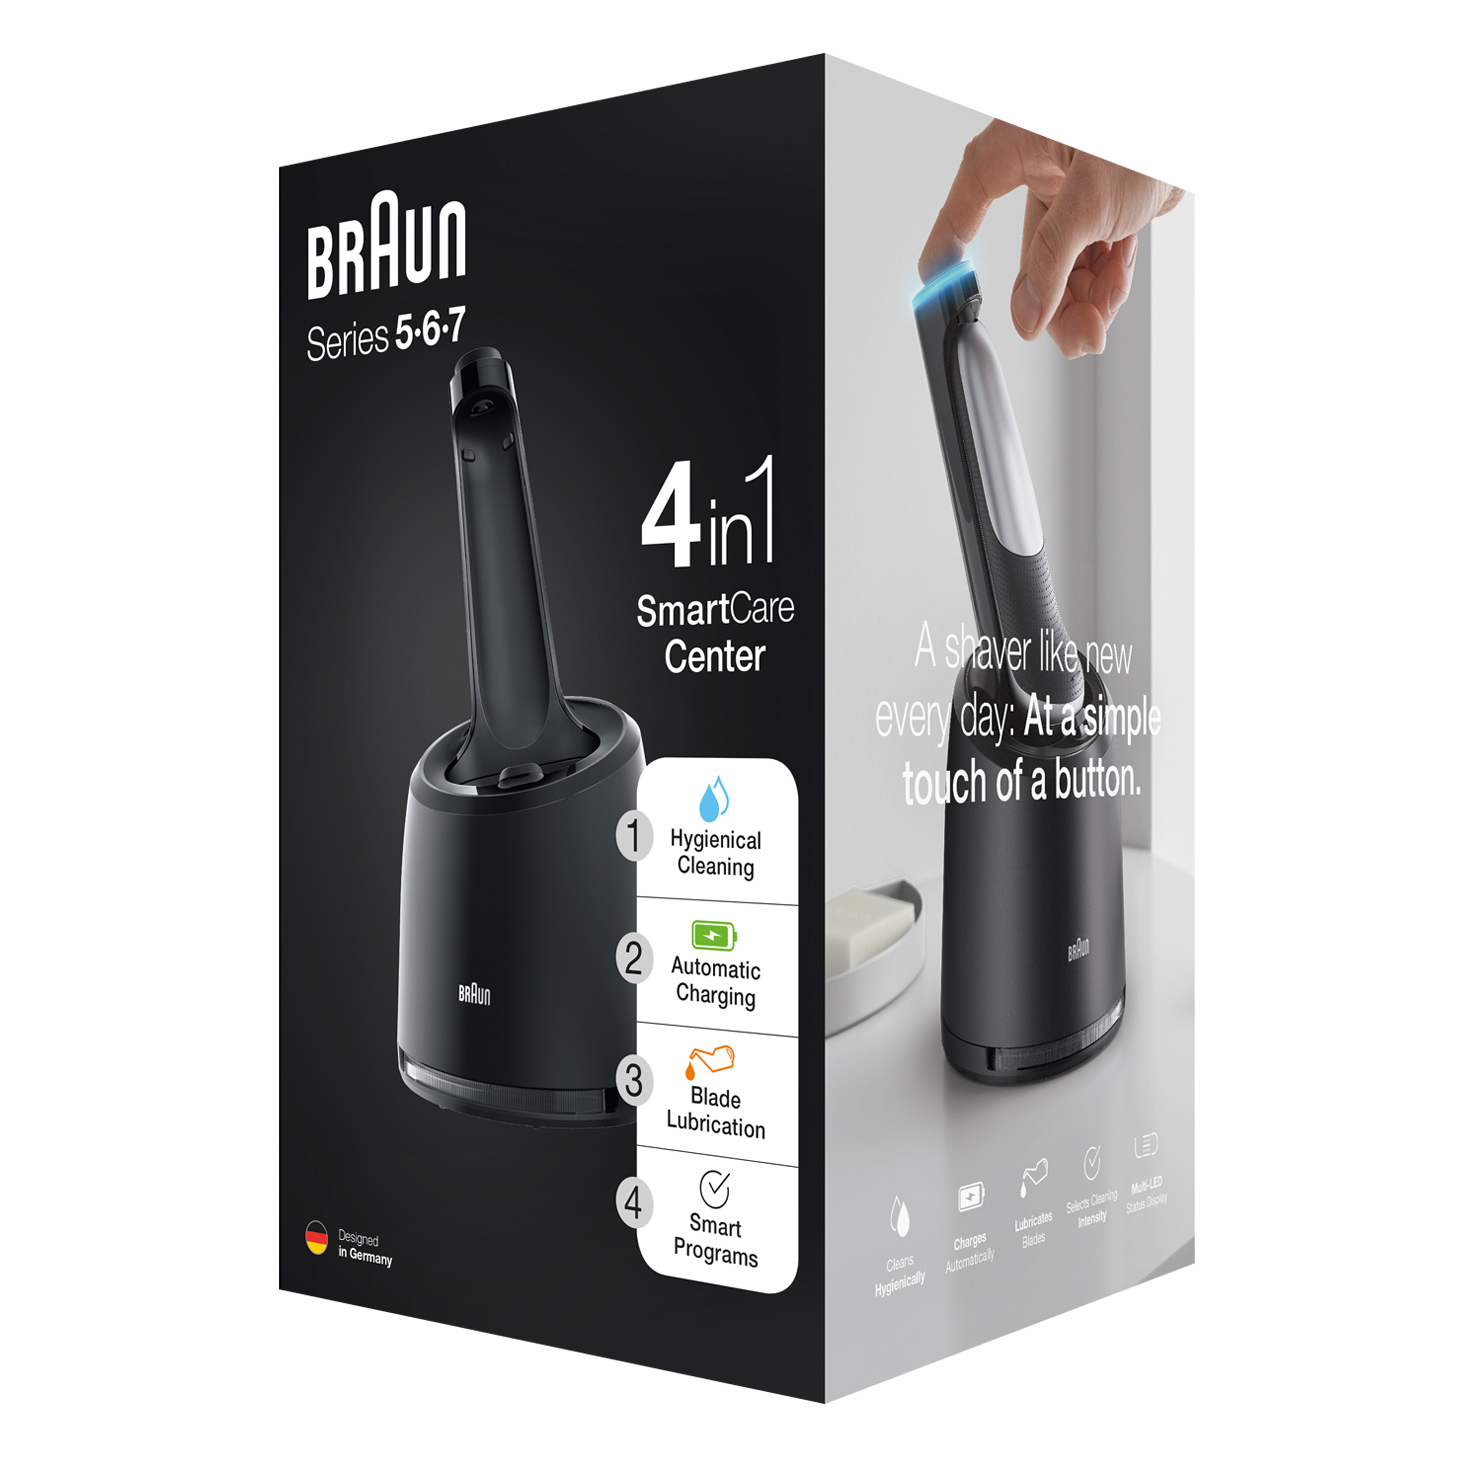 4 in 1 SmartCare Cleaning Center for Braun Series 5, 6 and 7 electric shaver (New generation)